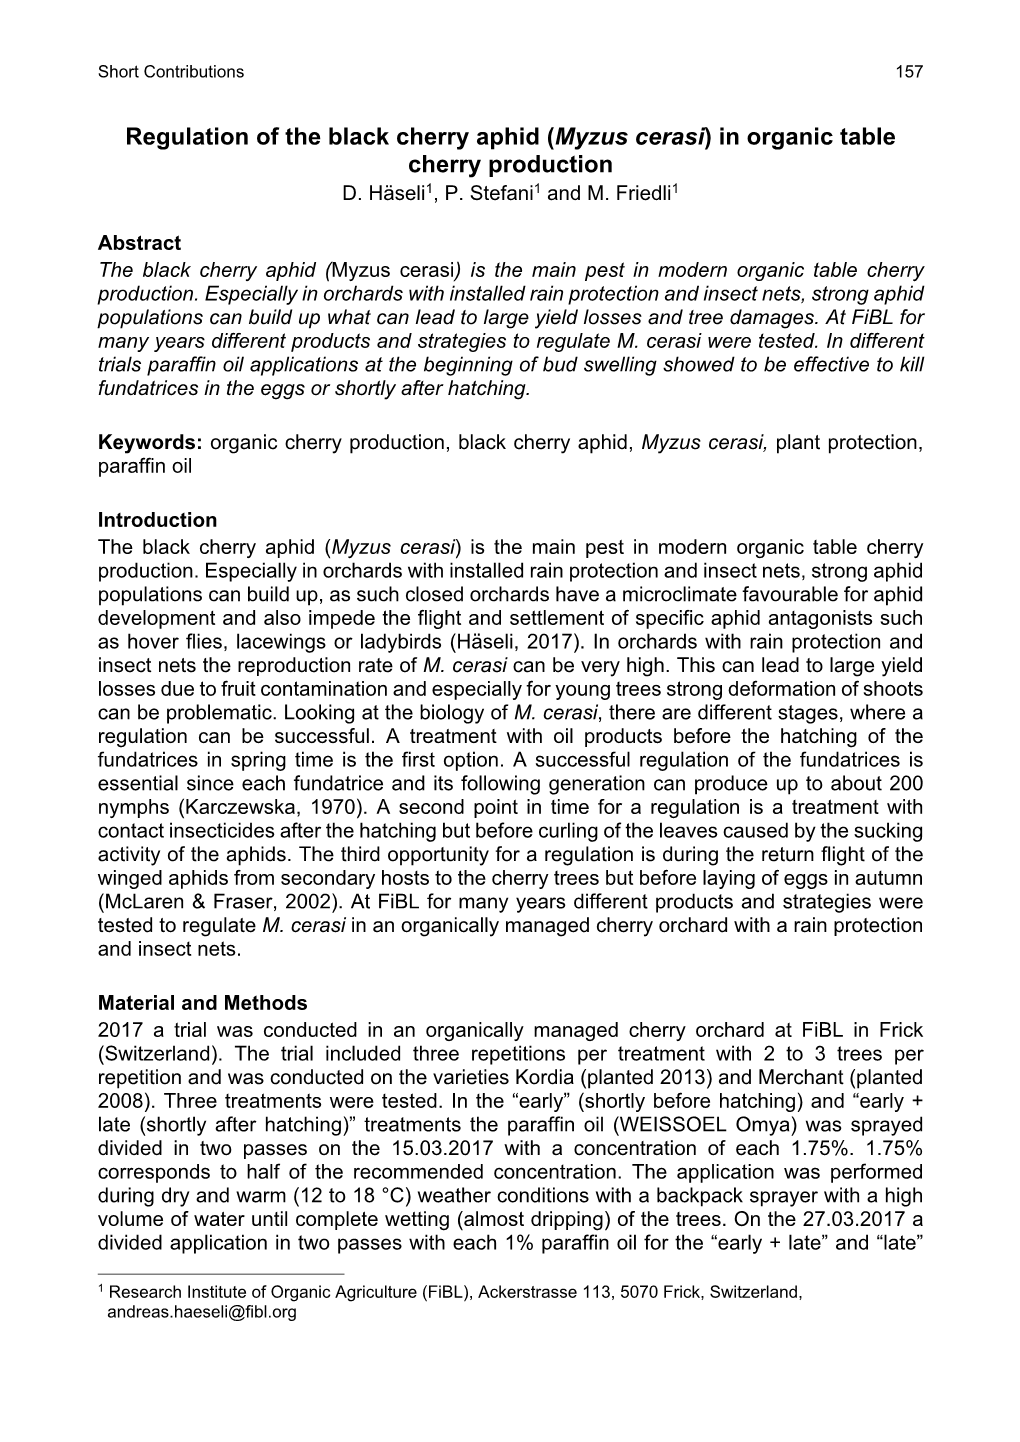 Regulation of the Black Cherry Aphid (Myzus Cerasi) in Organic Table Cherry Production D